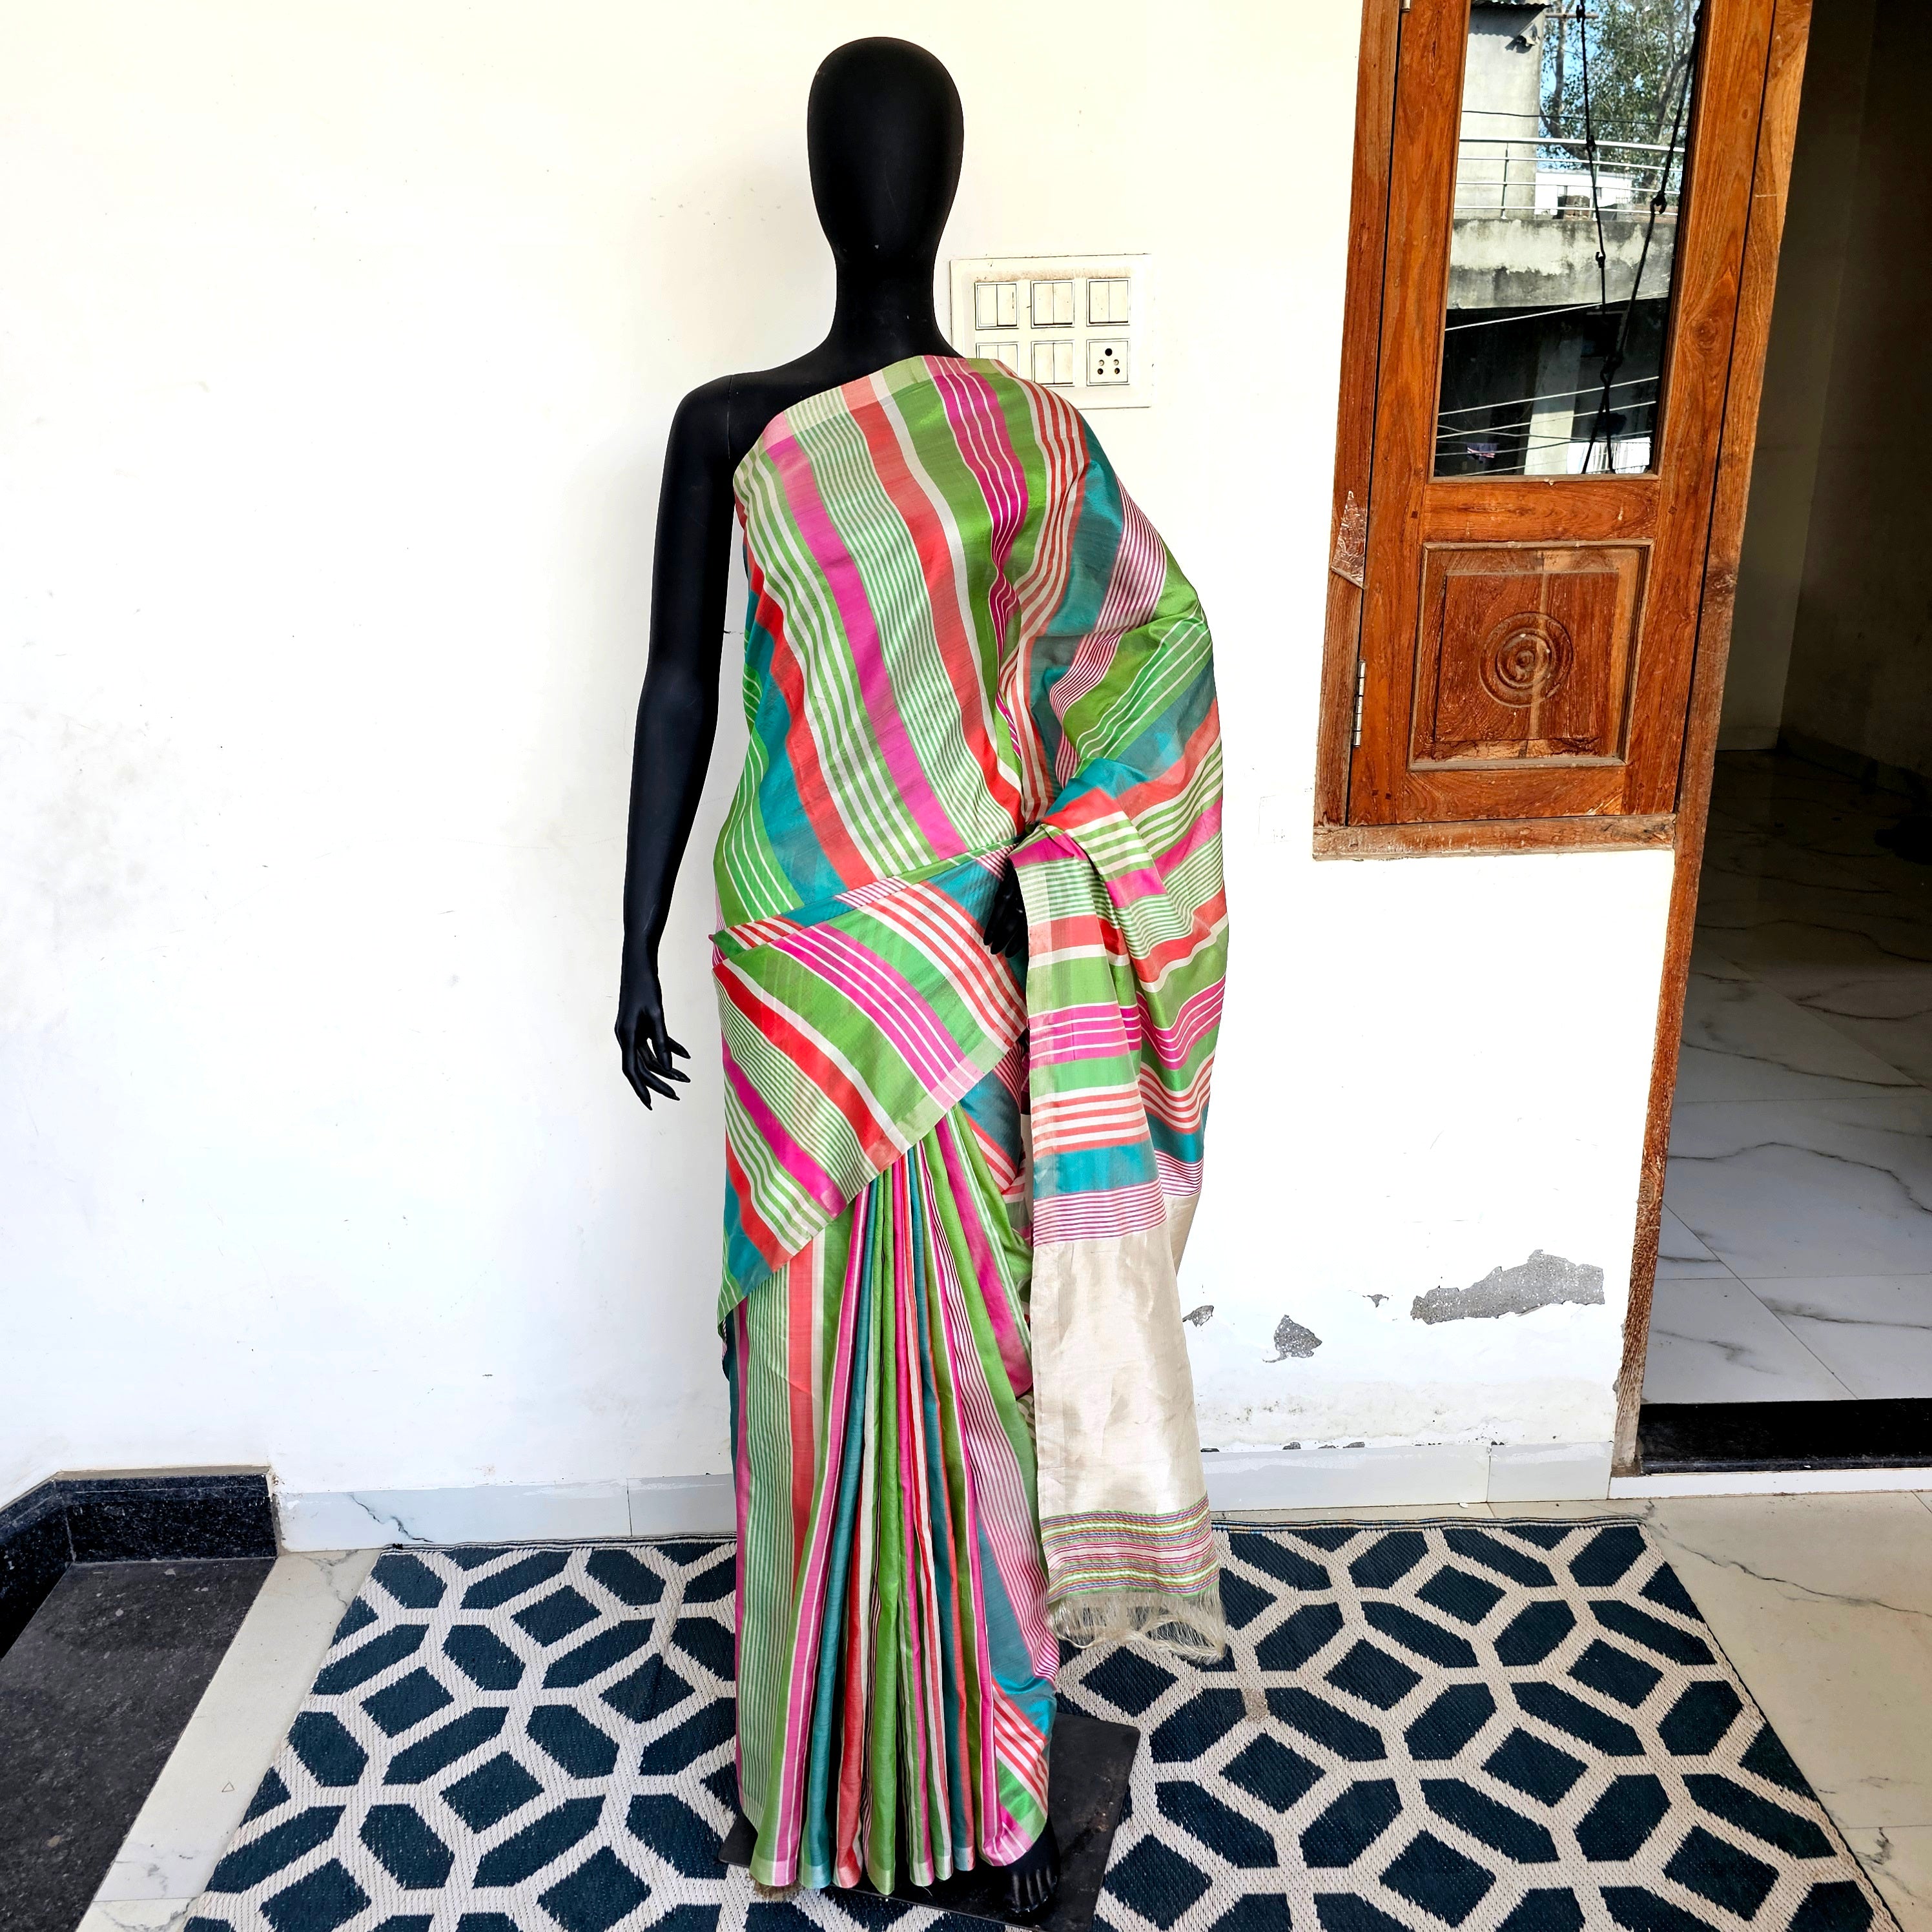 Silk×Silk Saree with 6 color uneven weft stripes.